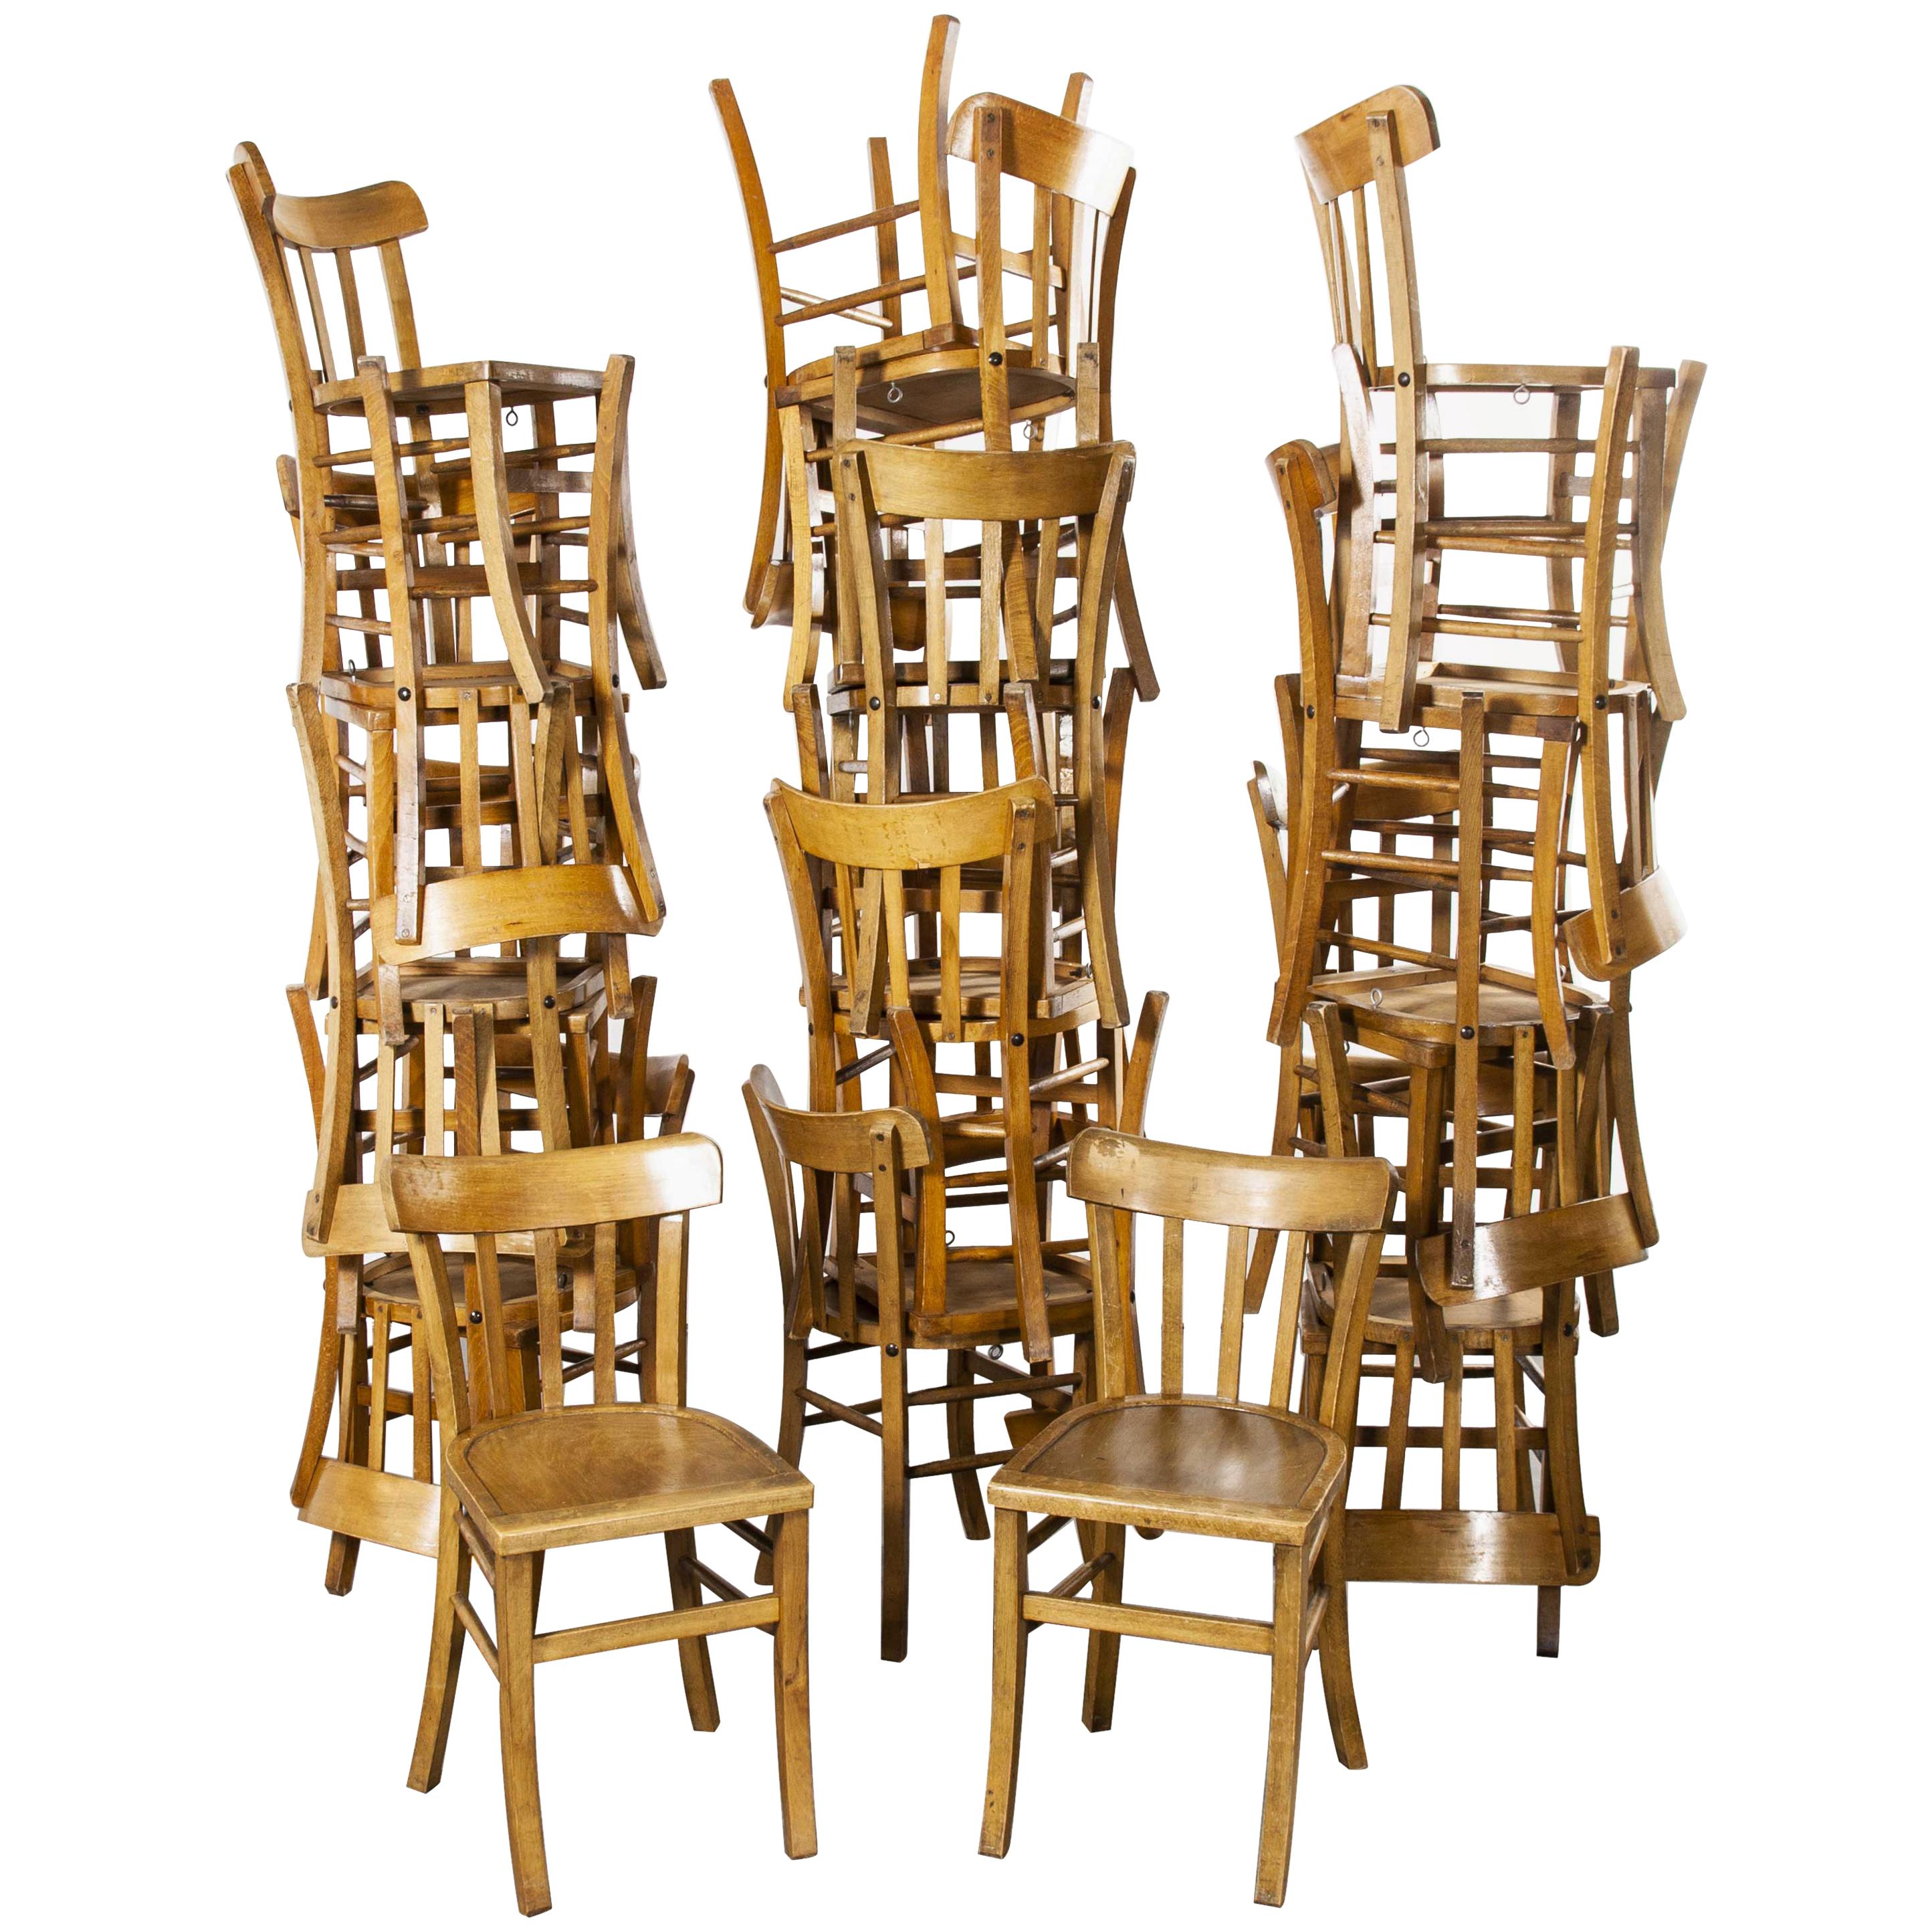 1950s French Made Luterma Bentwood Dining Chairs, Set of Twenty Four 'Model 3'